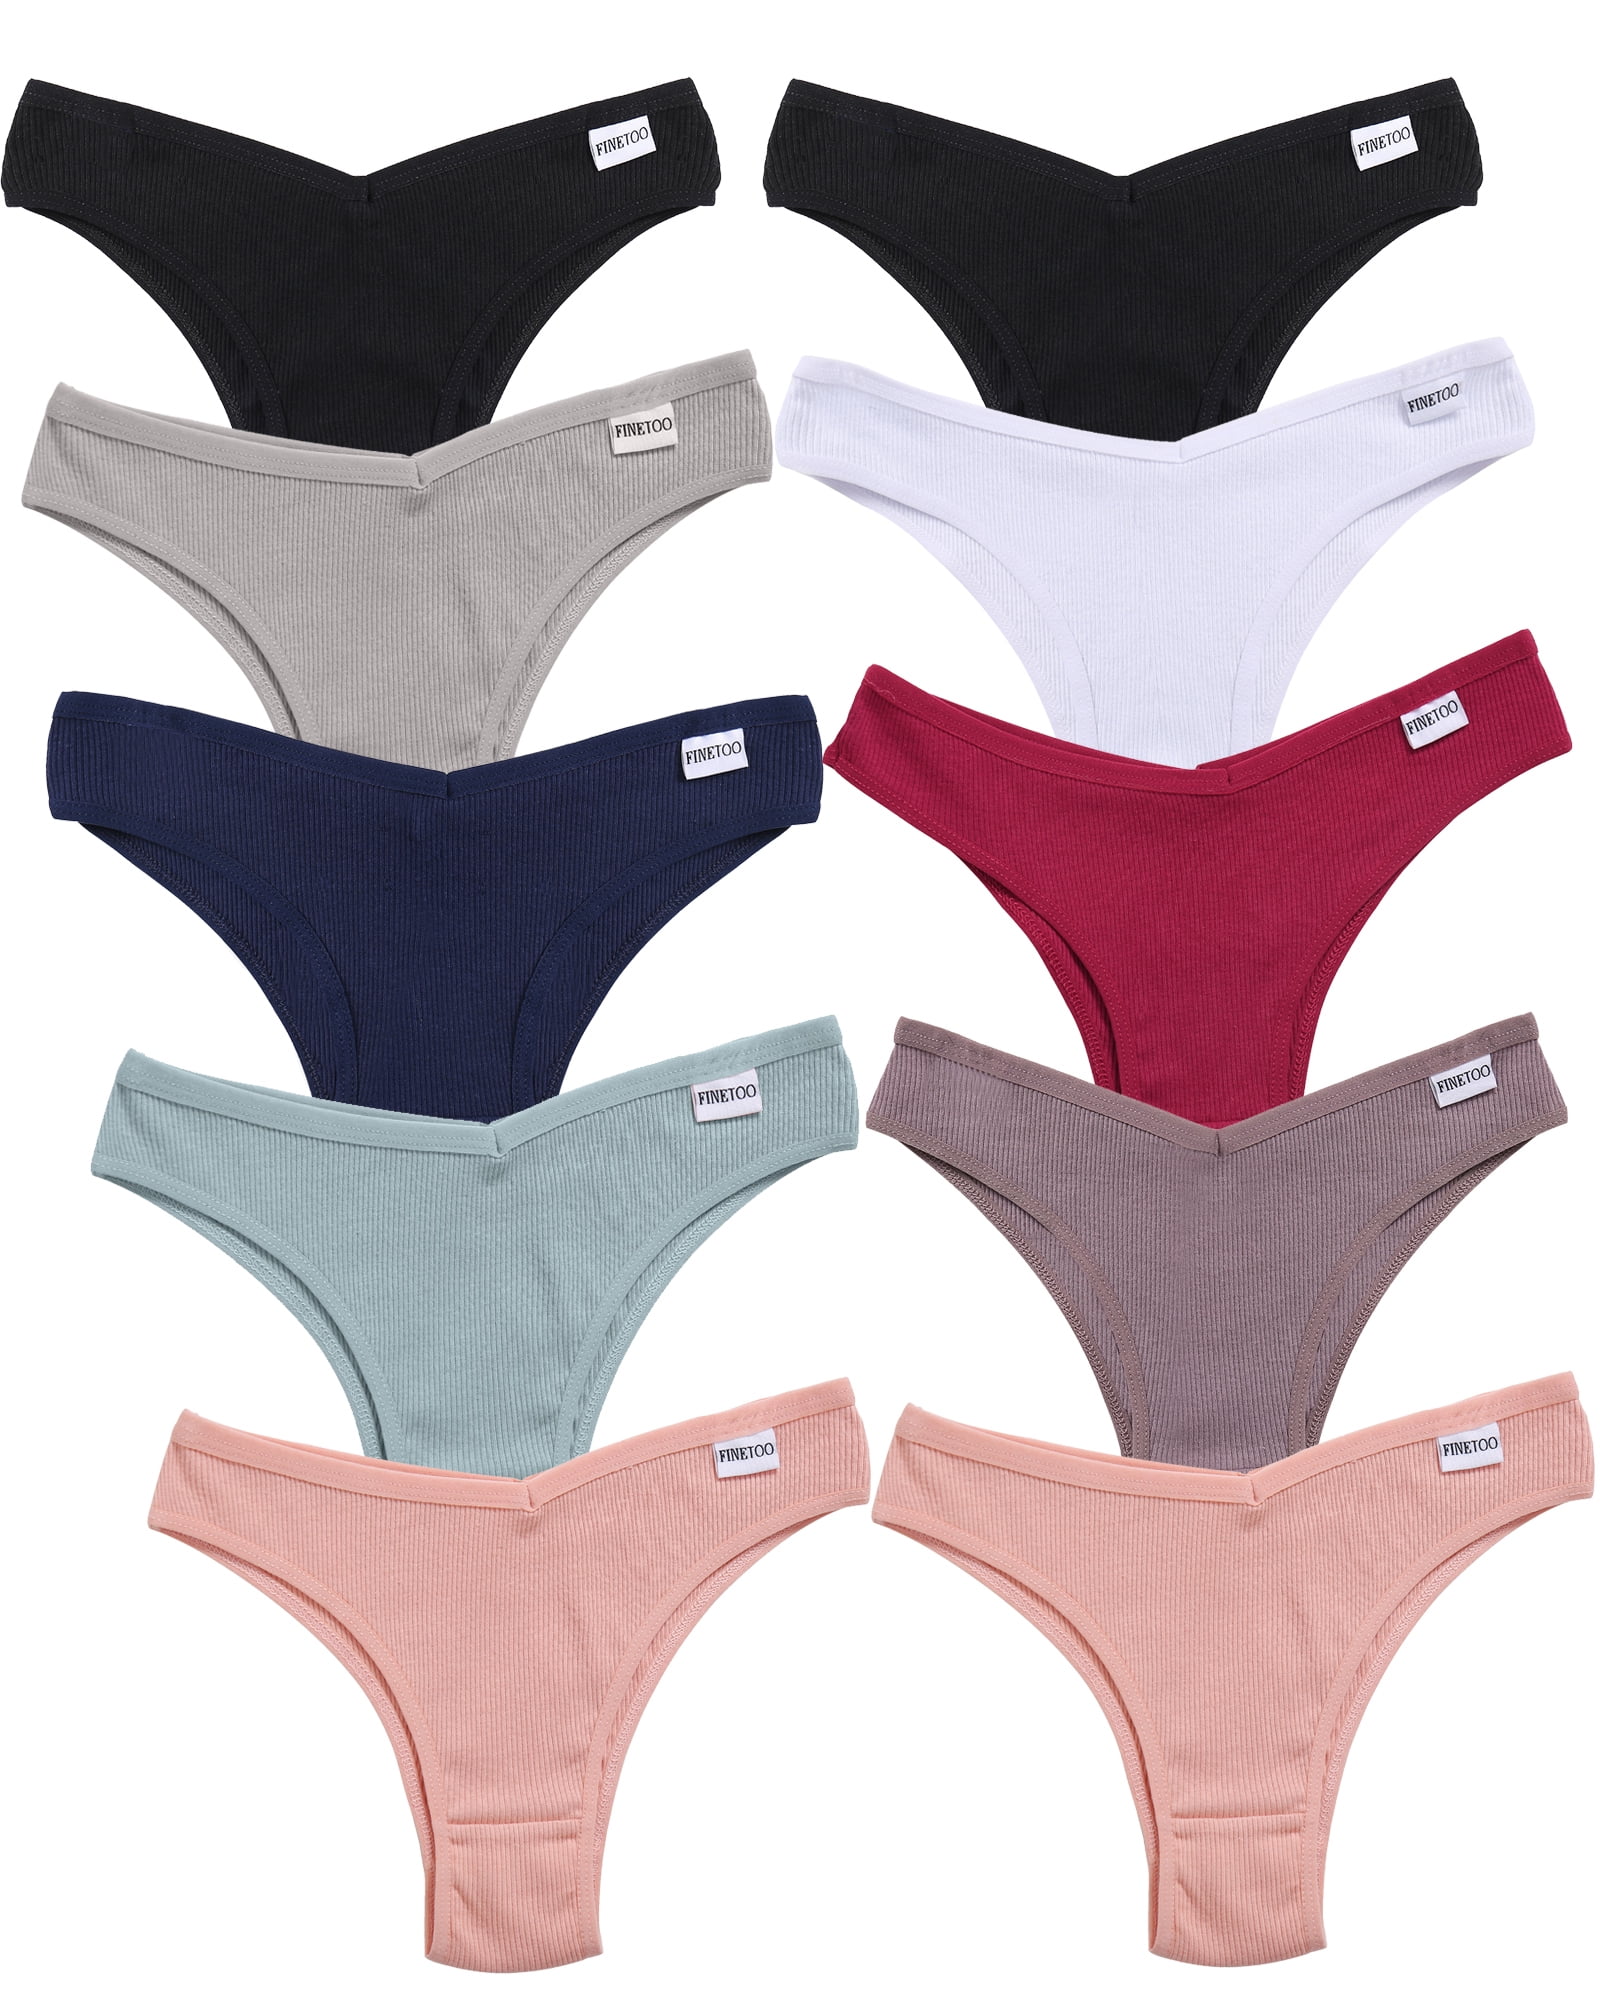 FINETOO 6 Pack Cotton Thongs for Women Breathable Low Rise - Import It All